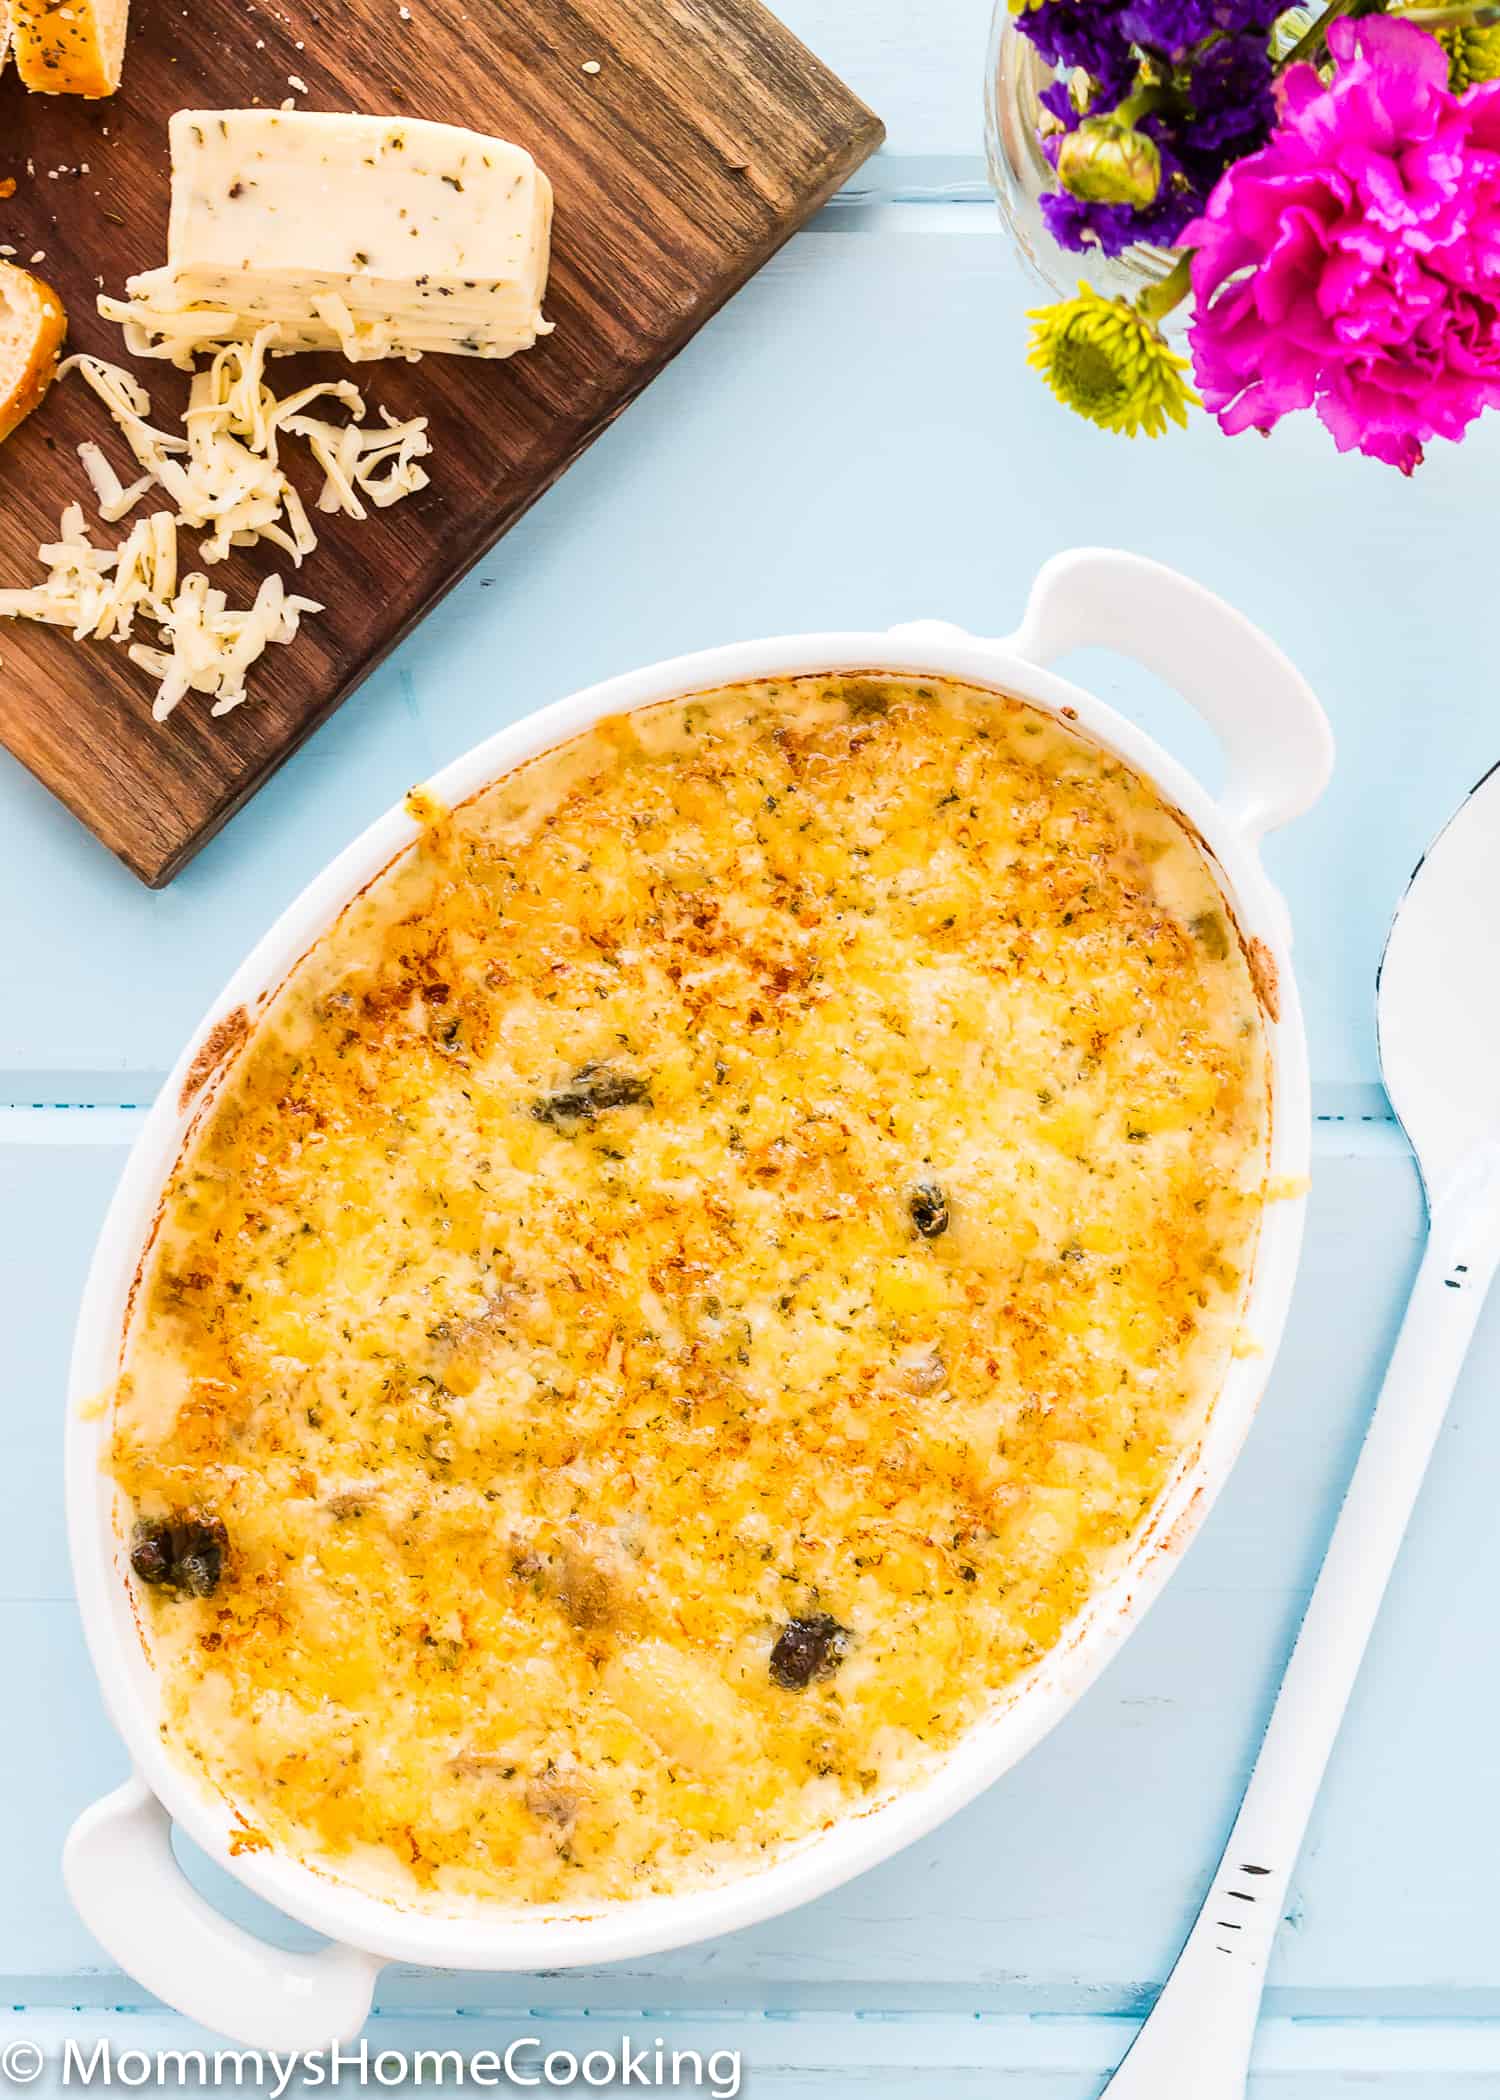 Cheesy Gnocchi Casserole over a wooden table with flowers and a cheese board